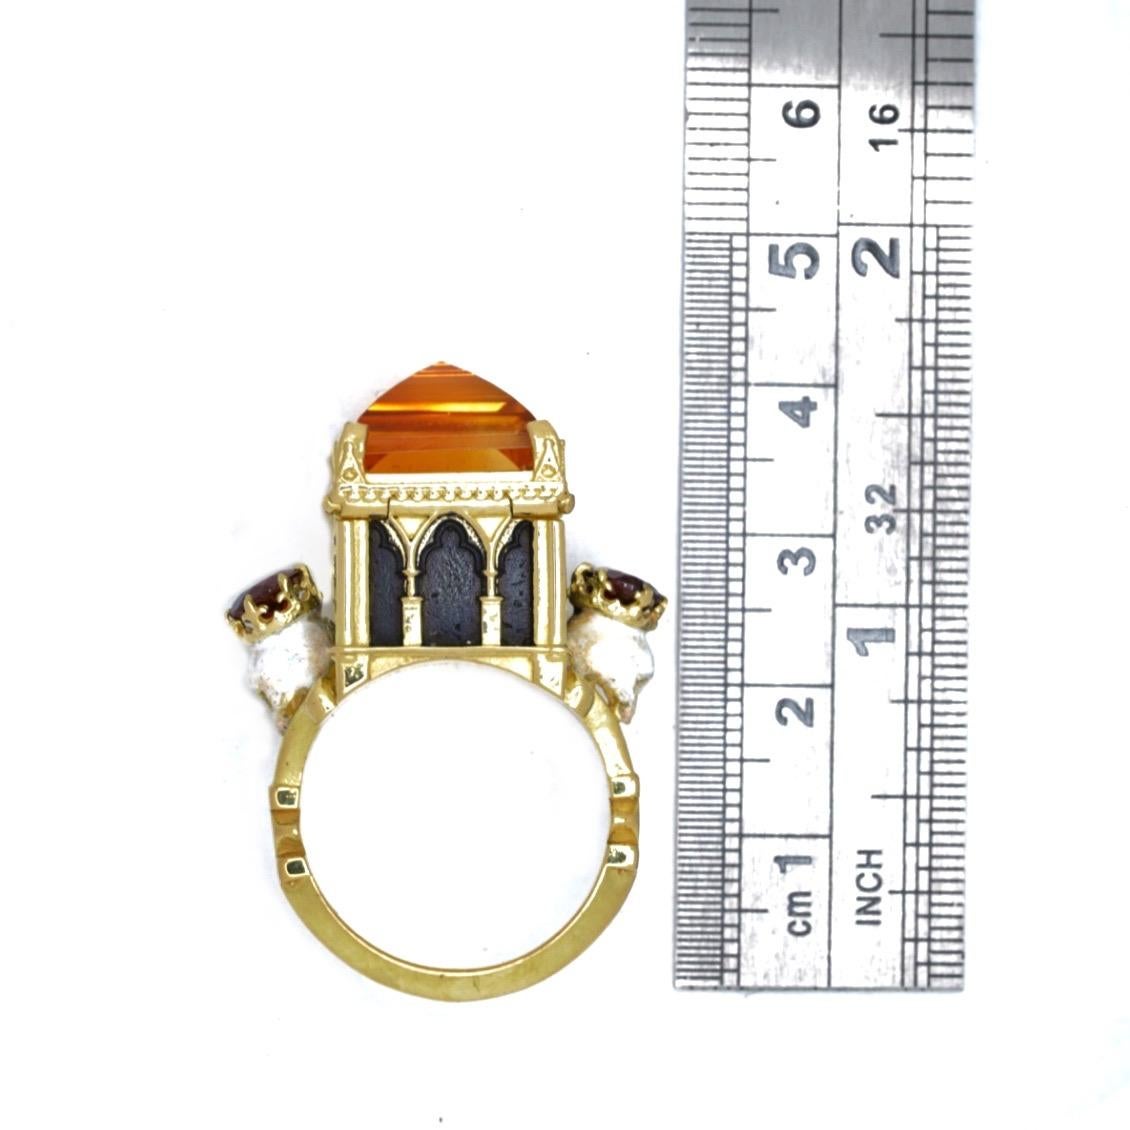 Women's or Men's Catacomb Saints Poison Chamber Ring in 18 Karat Gold with Citrine and Garnets